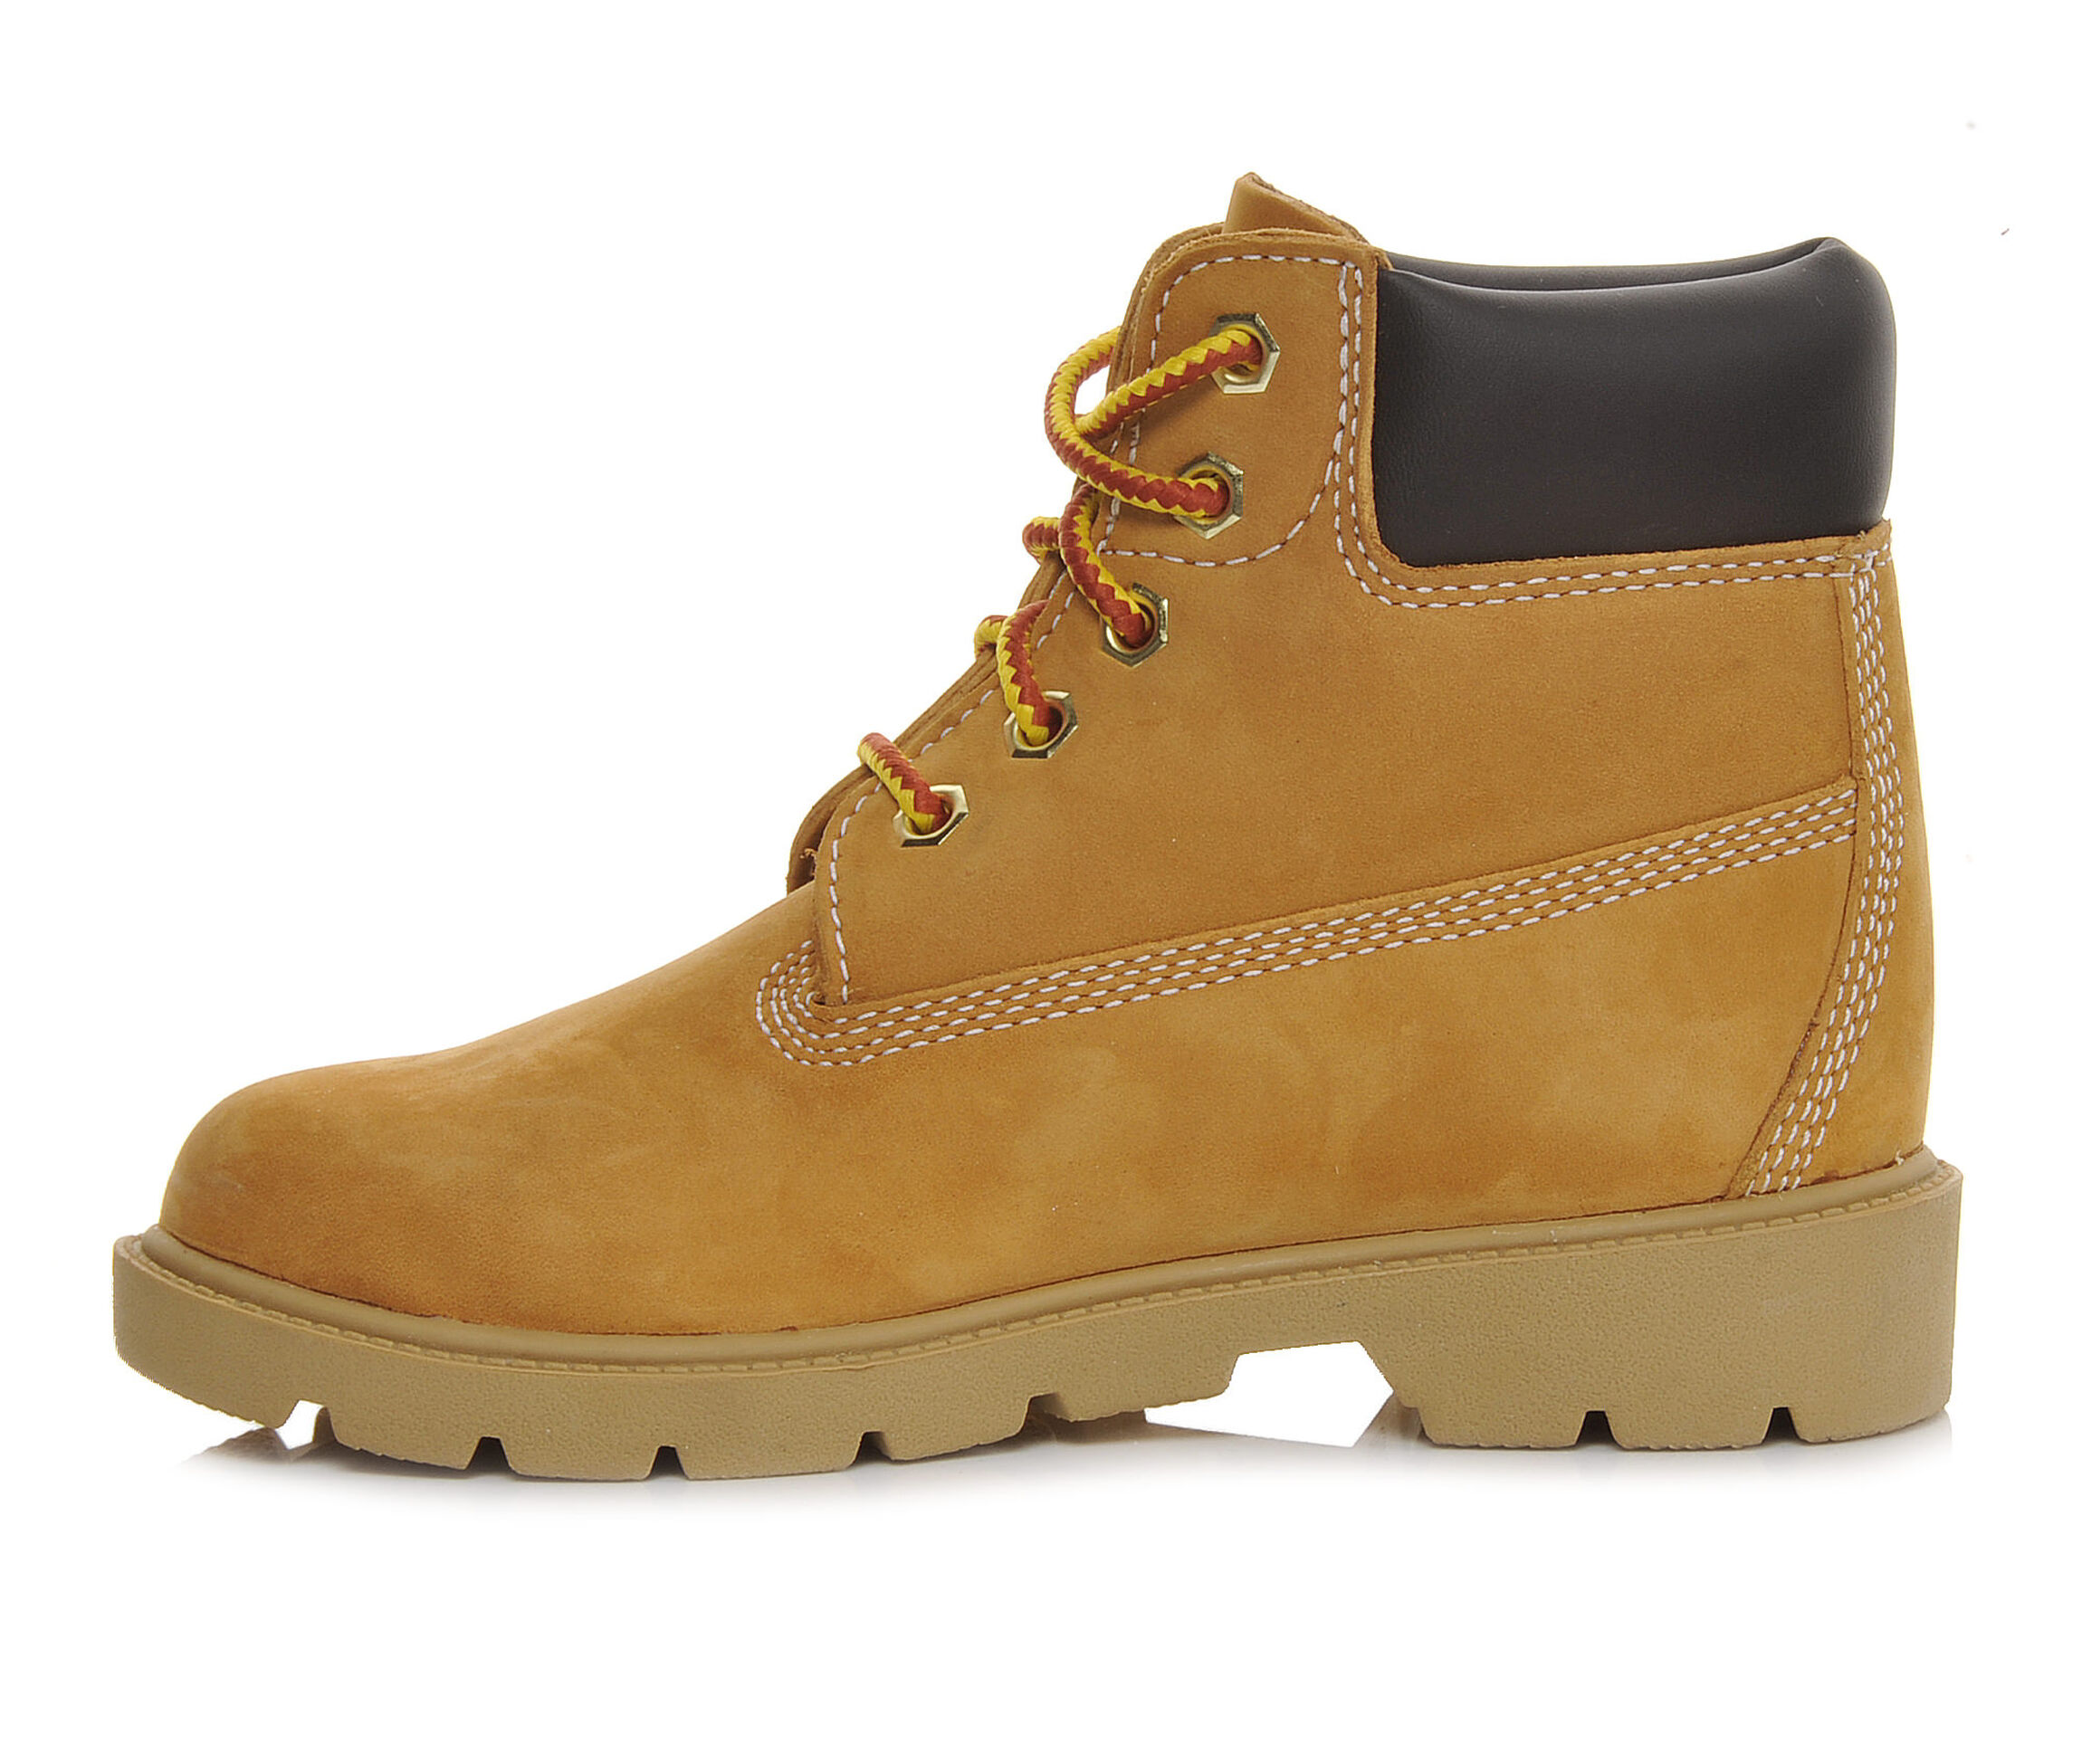 Kids' Timberland Shoes & Boots | Shoe